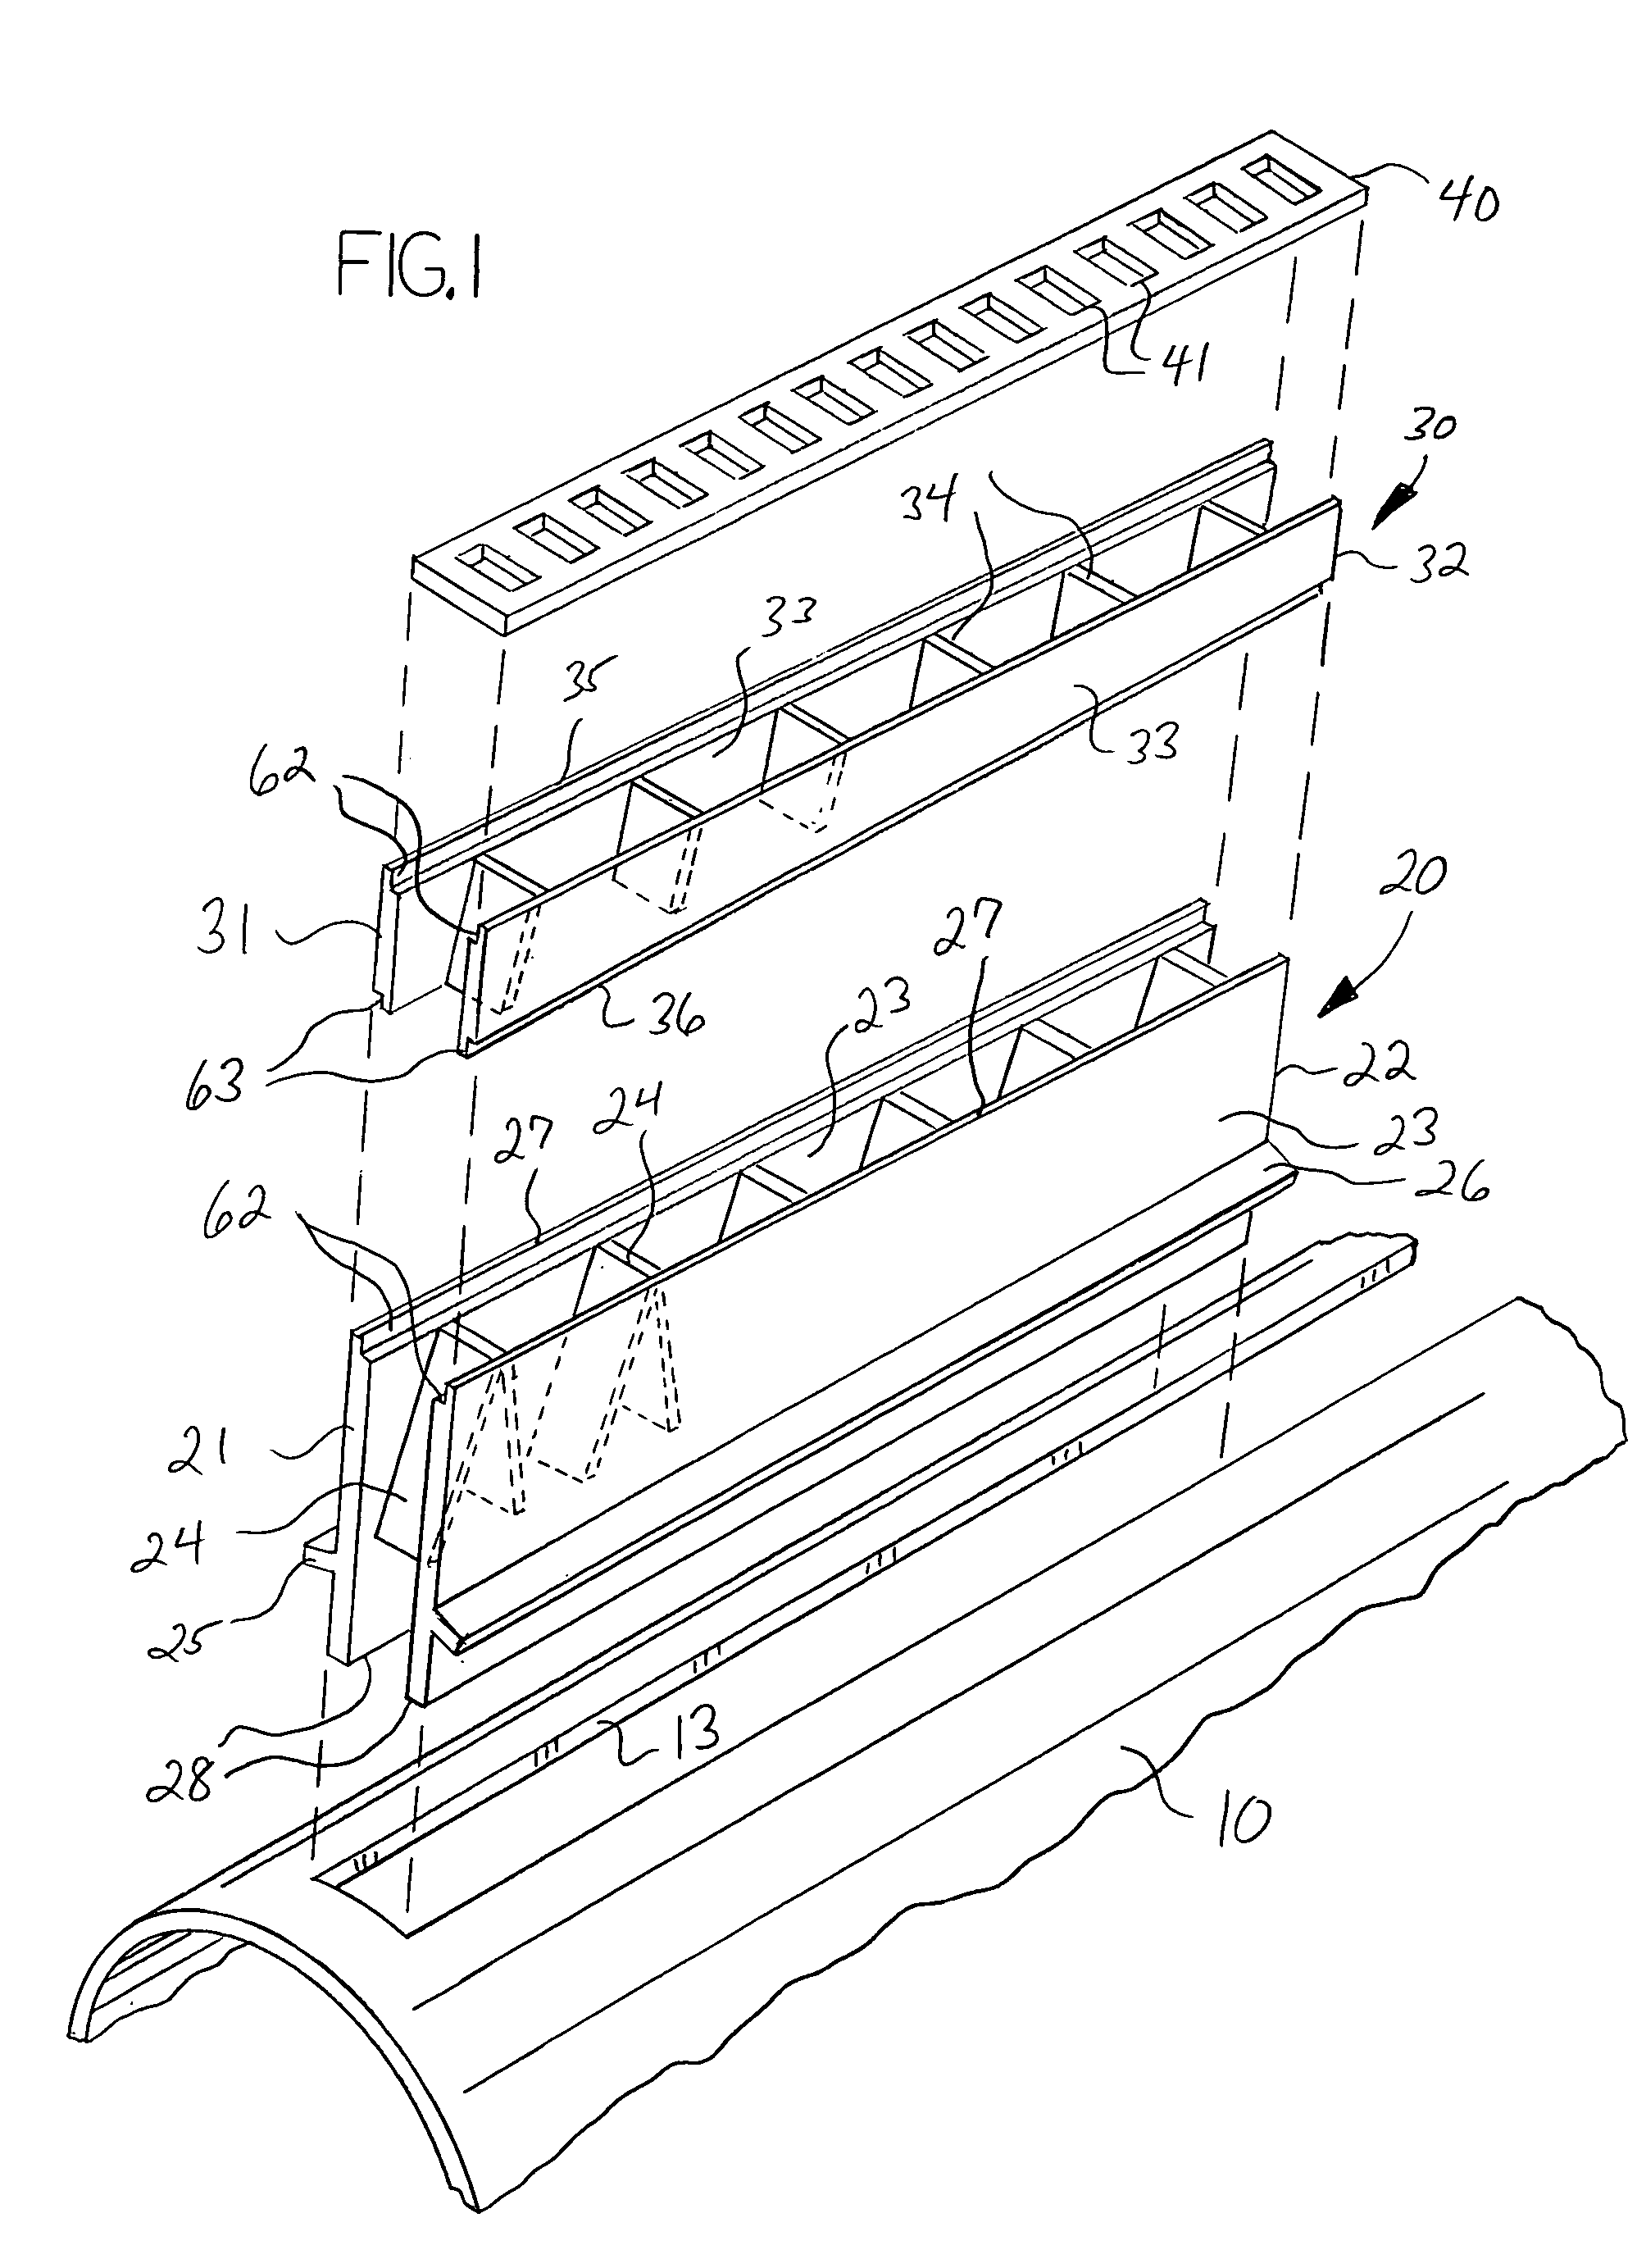 Modular slotted drain assembly